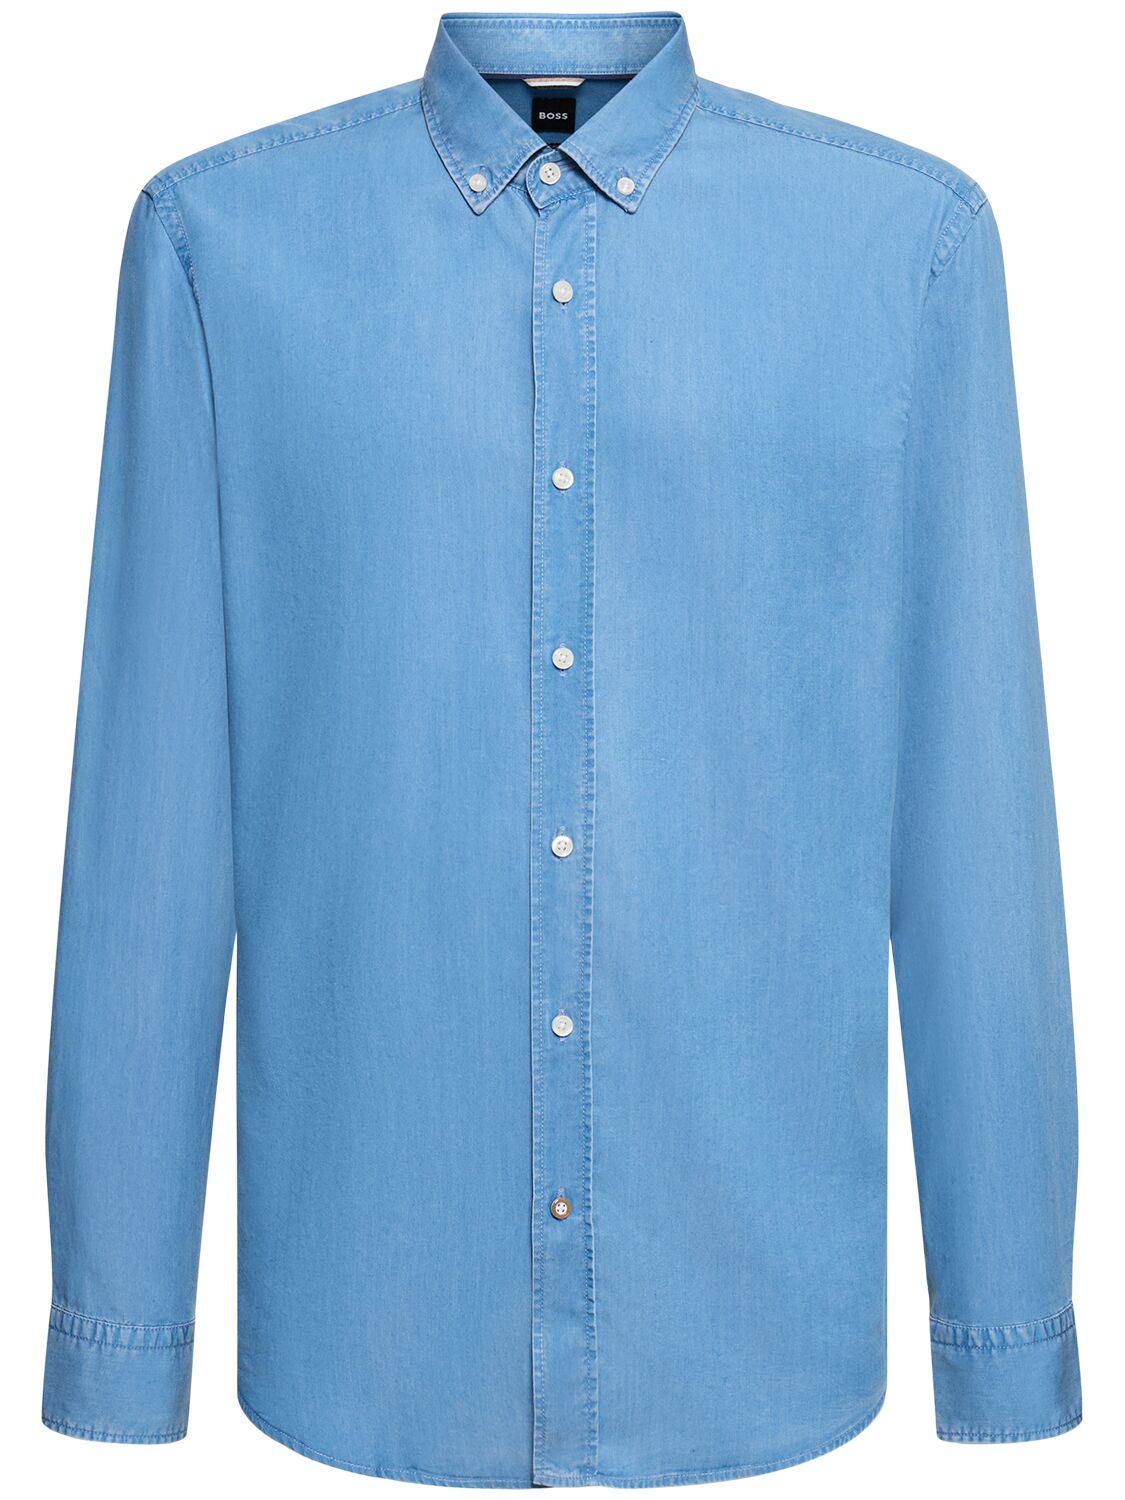 Hugo Boss Bright Blue Casual Fit Shirt With Button Down Collar 50513728 437